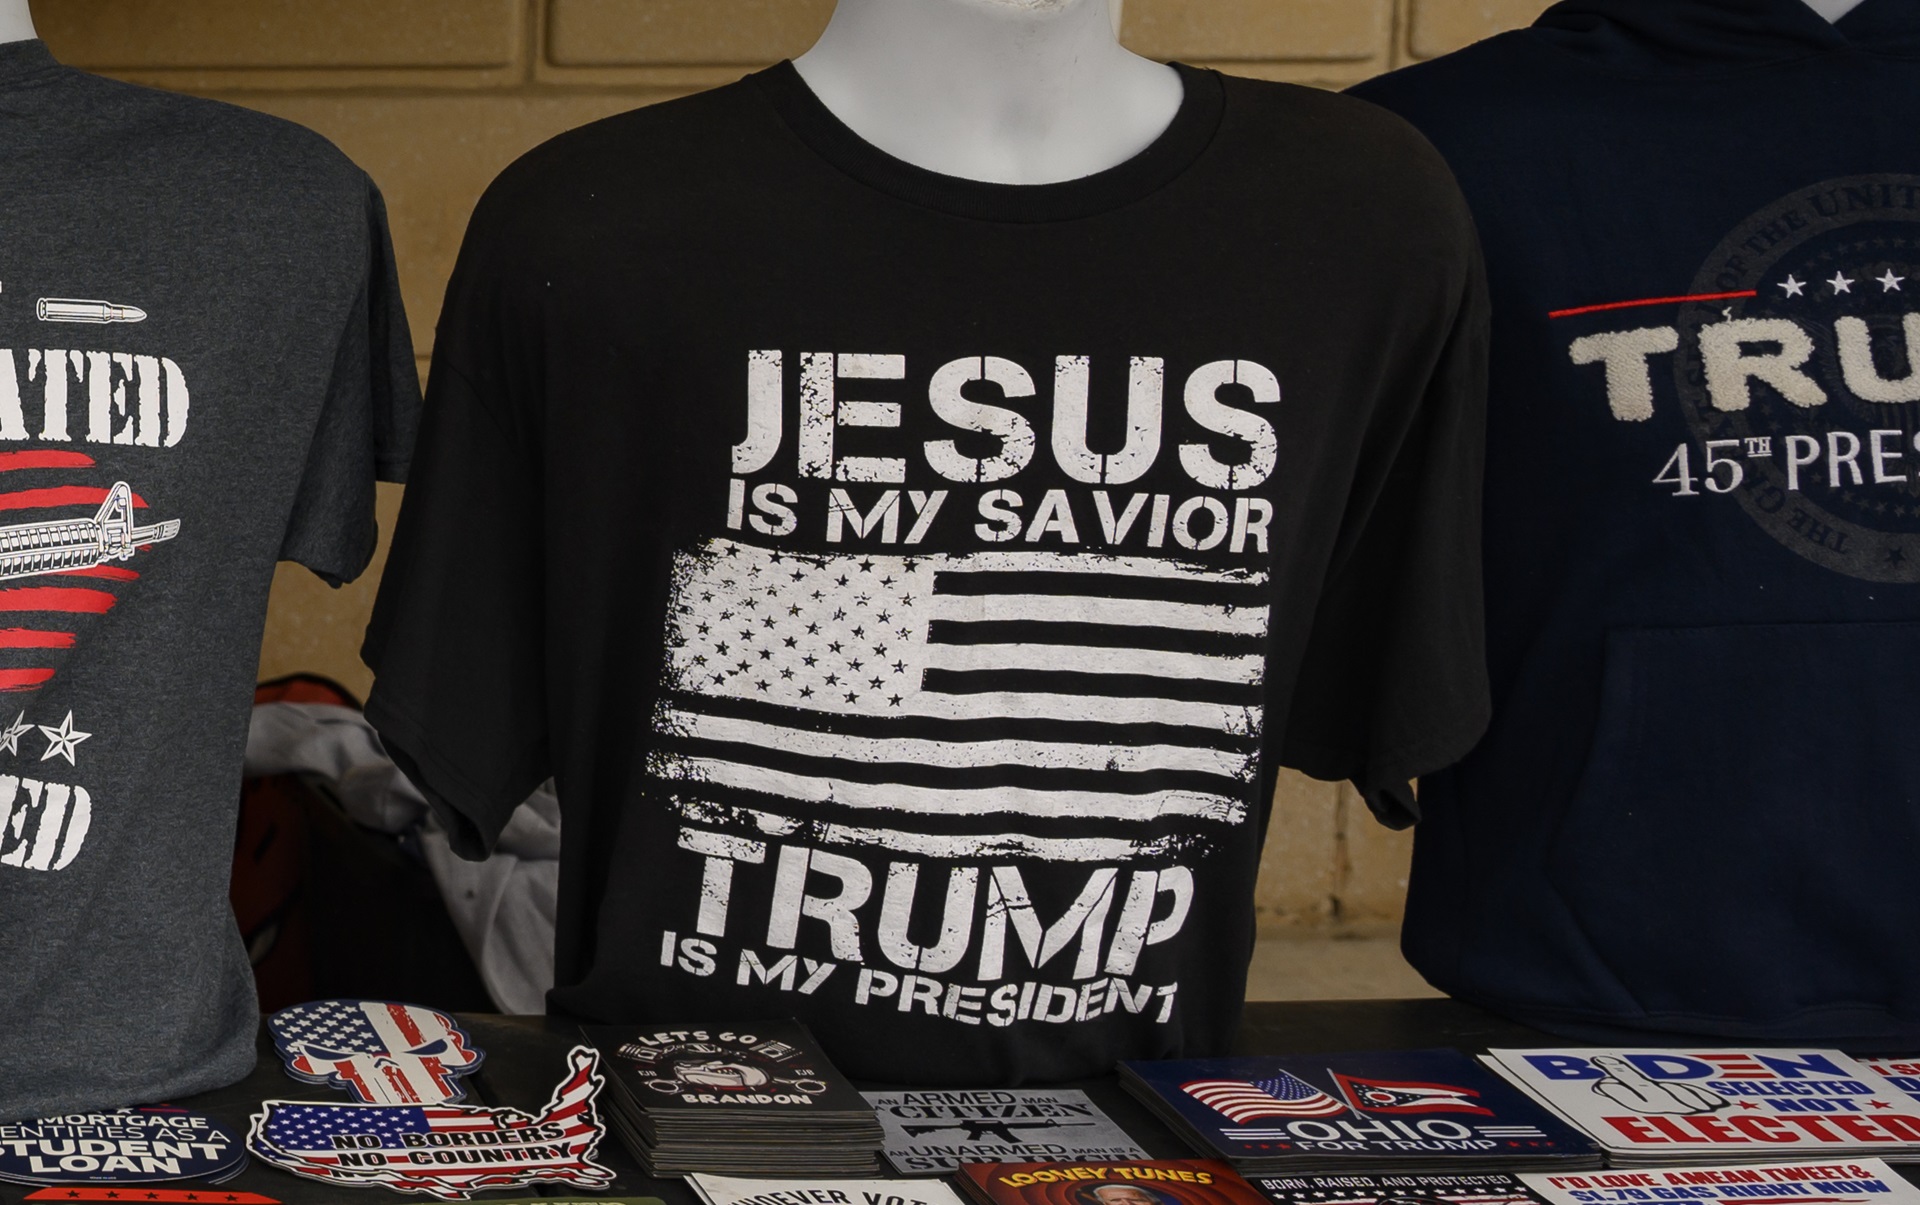 91 criminal charges won't stop Evangelicals from voting Trump